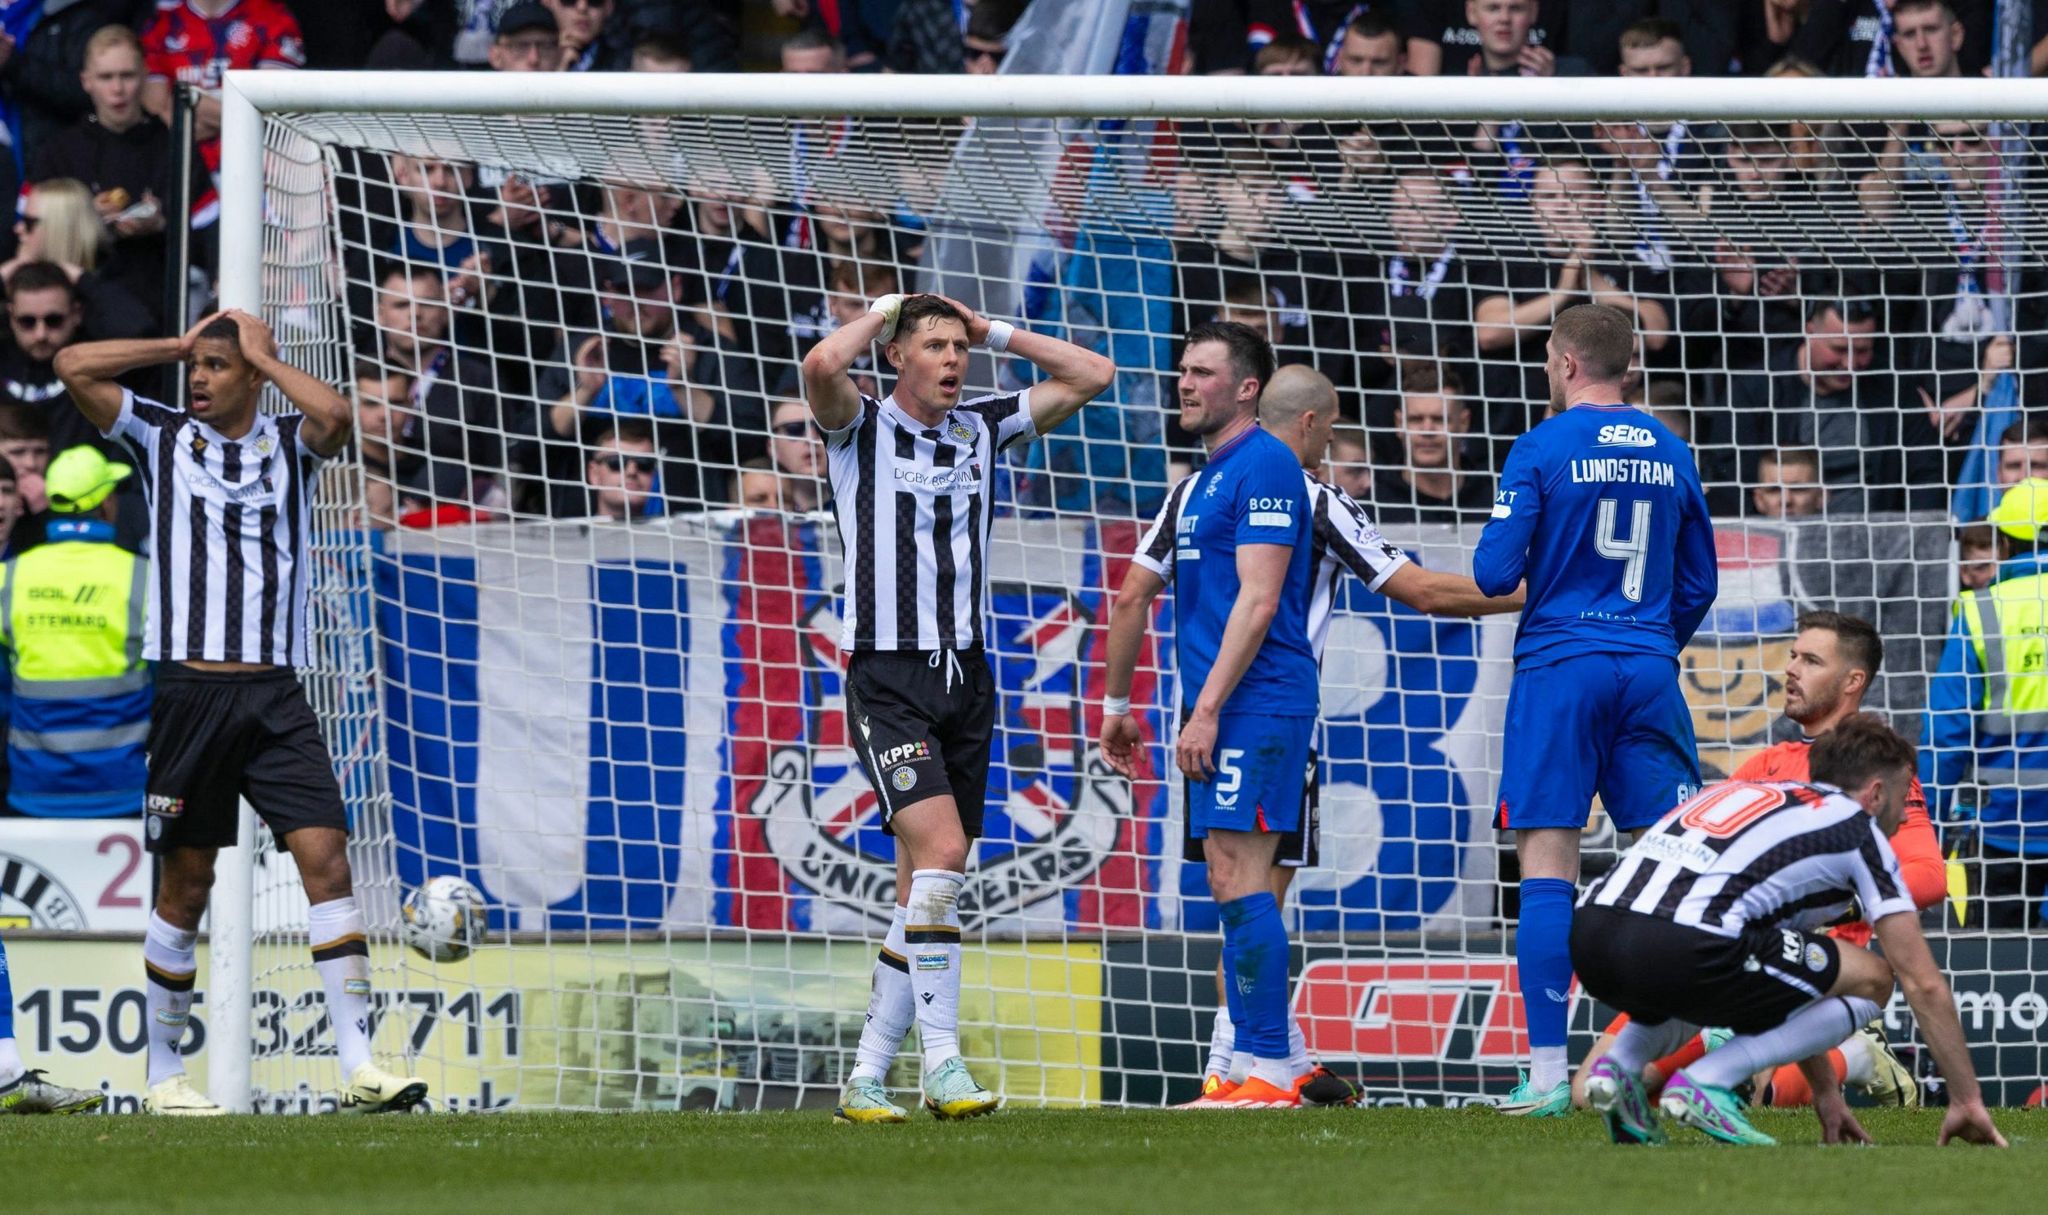 St Mirren are left frustrated against Rangers